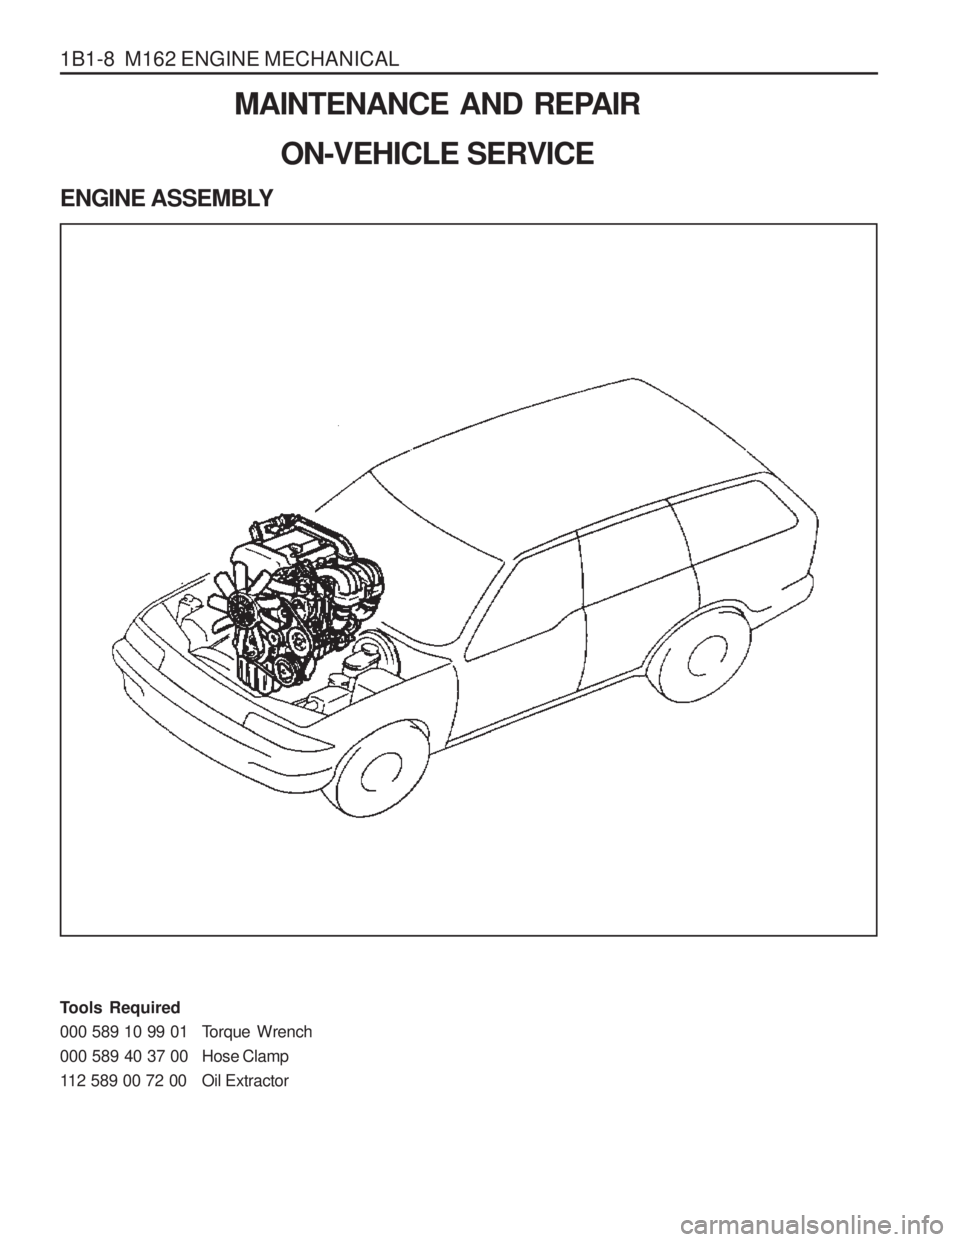 SSANGYONG MUSSO 2003 Workshop Manual 1B1-8  M162 ENGINE MECHANICALMAINTENANCE AND REPAIR
ON-VEHICLE SERVICE
ENGINE ASSEMBLY 
Tools Required 
000 589 10 99 01 Torque  Wrench
000 589 40 37 00 Hose Clamp
112 589 00 72 00 Oil Extractor  